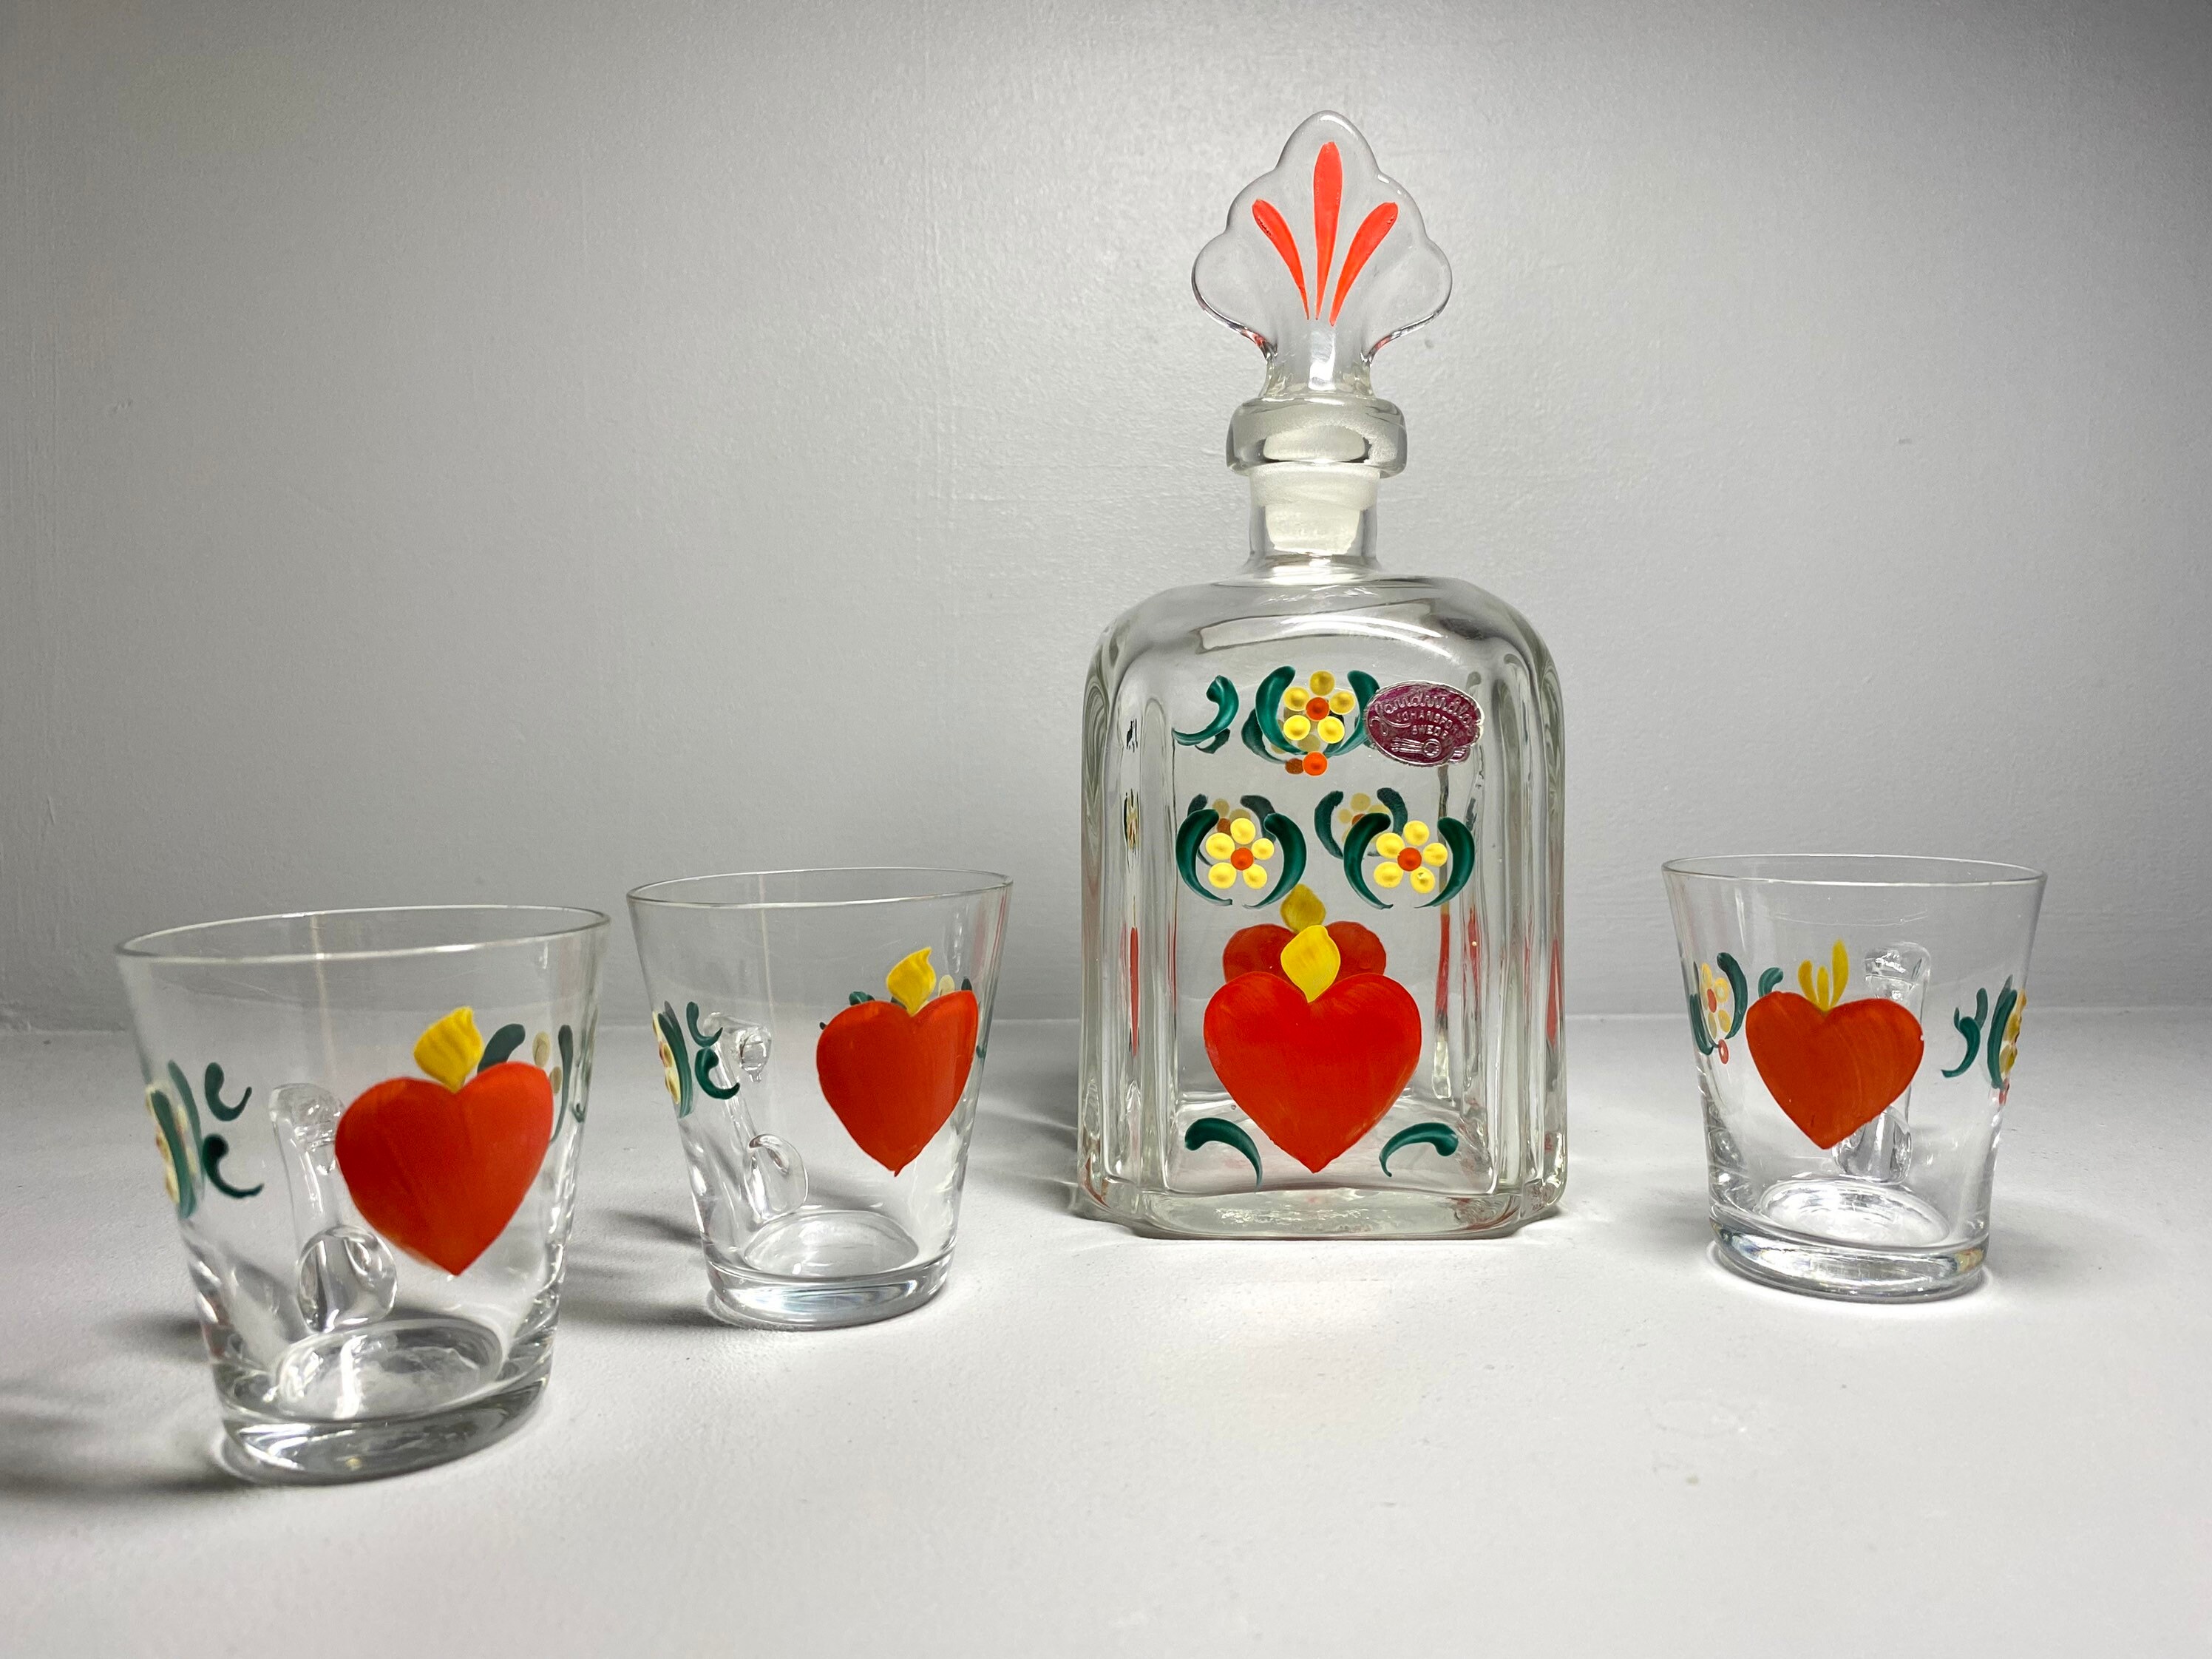 6 Shot Glasses and Glass Decanter w/ USSR Soviet Coat of Arms GIFT SET FOR MEN 